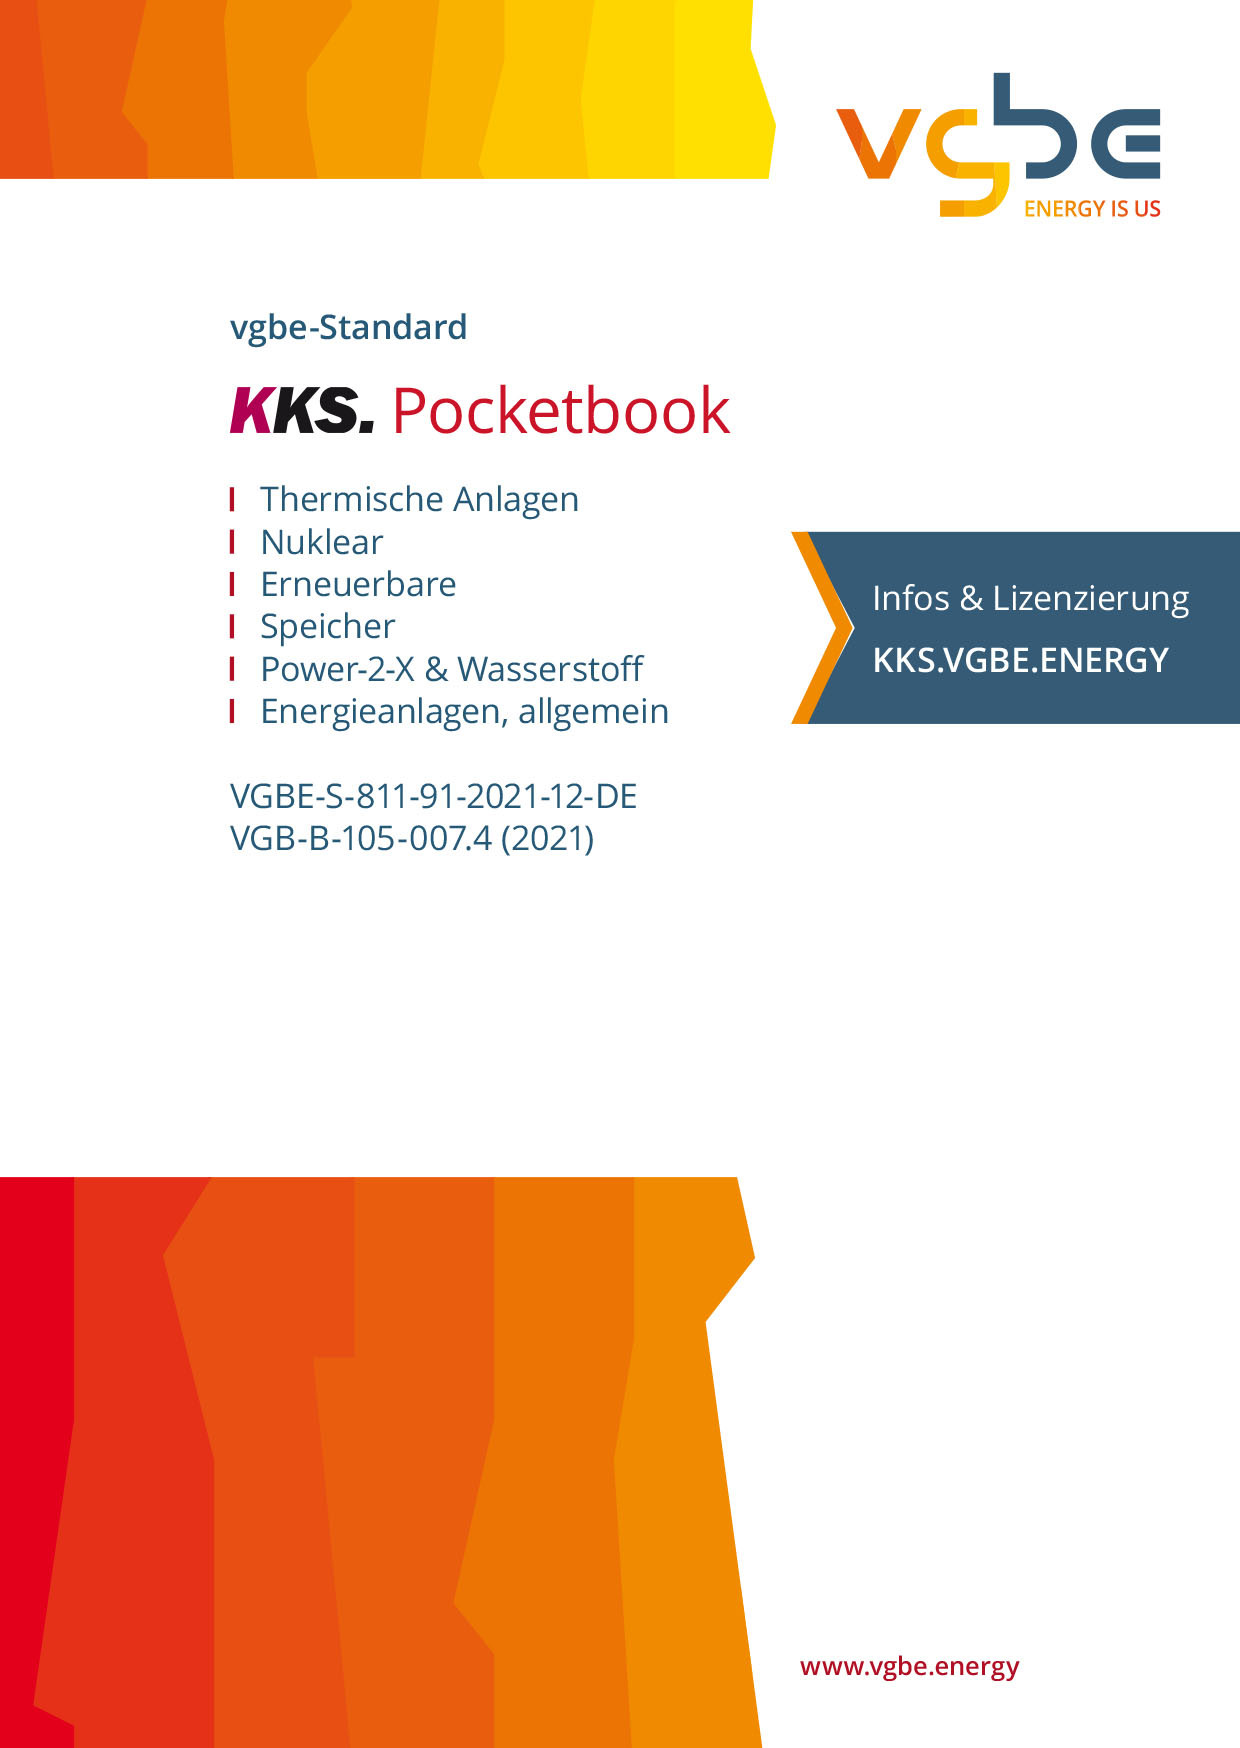 KKS Identification System for Power Stations | Pocketbook, Licensing, Overview (ebook, free of charge)